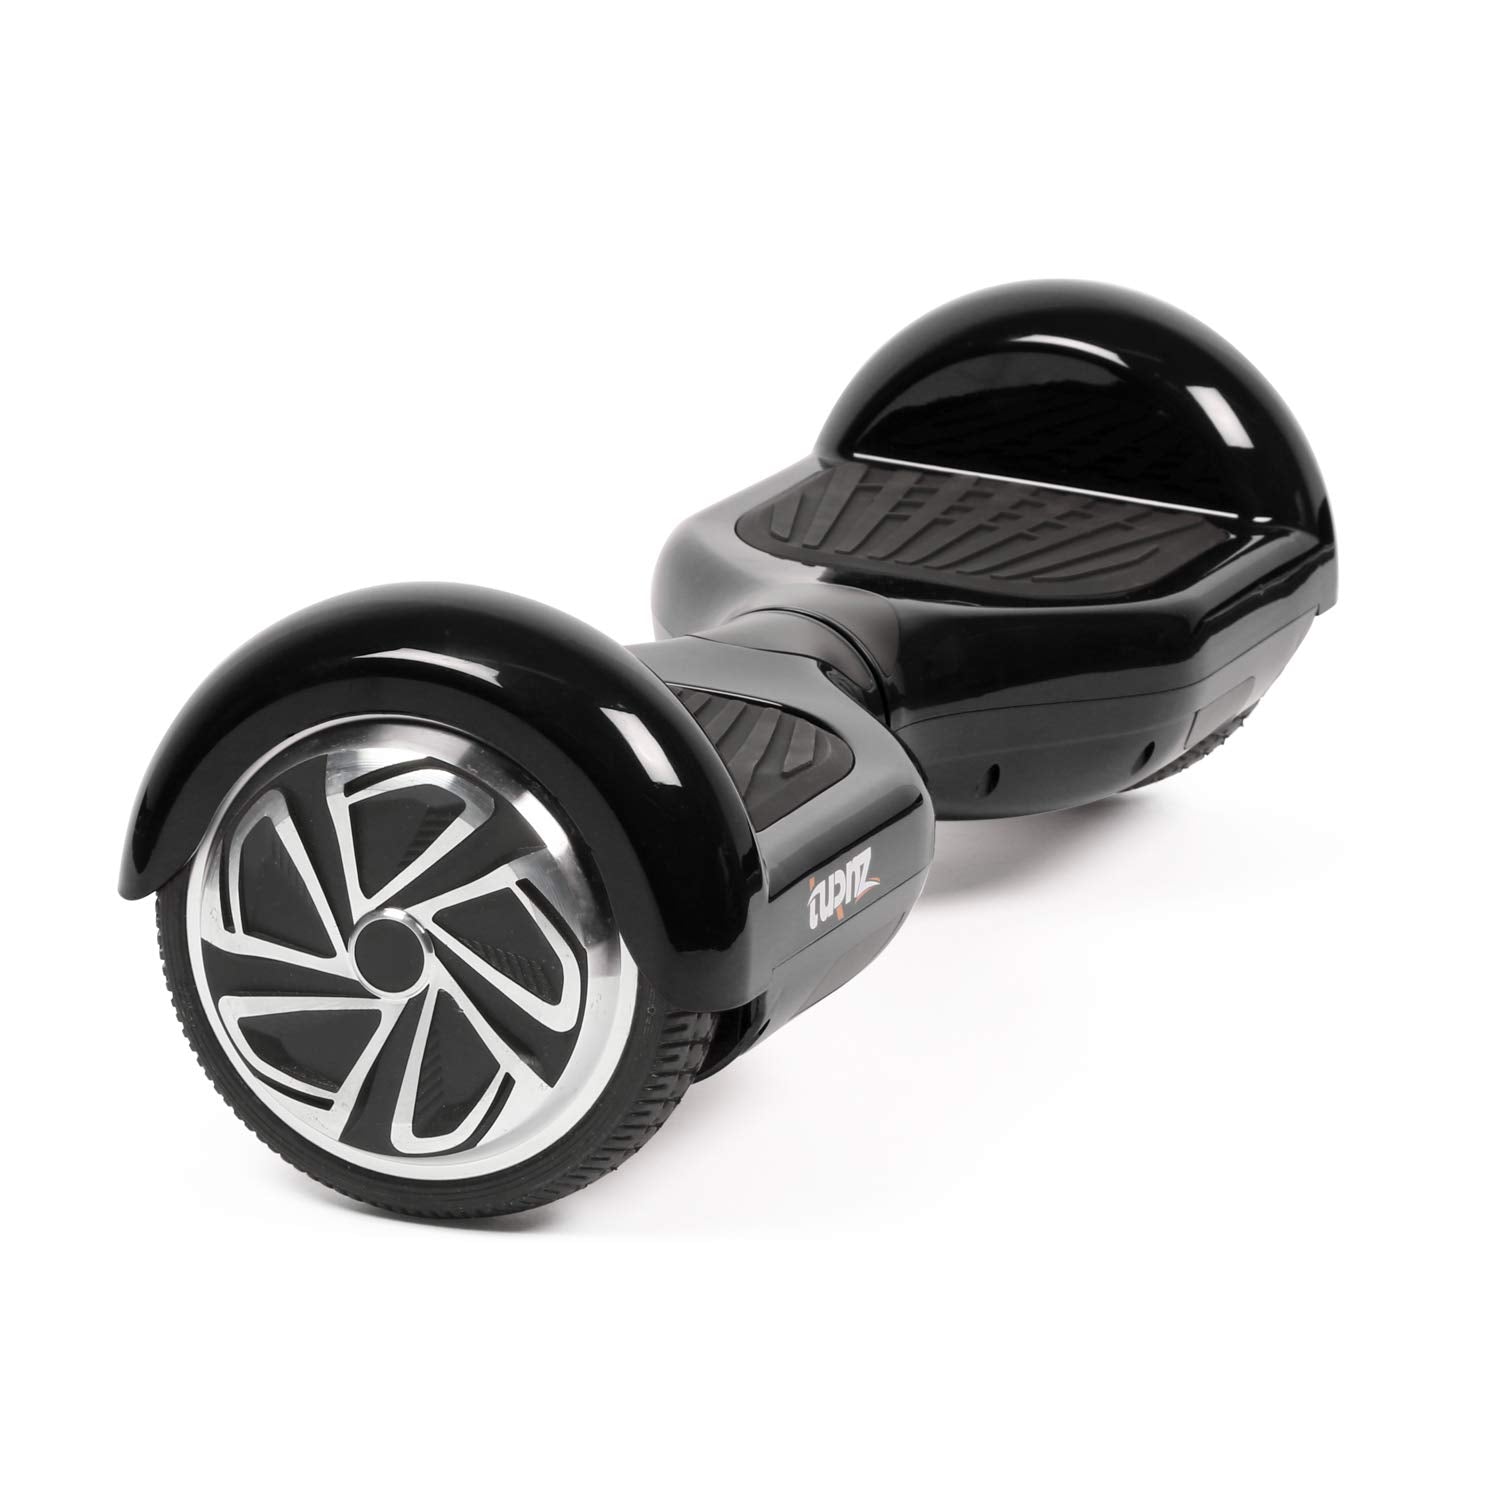 tuRnz Valley650 Self Balancing Hoverboard, 500W Power, UL 2272 Certified, Bluetooth Speaker, Exceptional Long Range Ride (15.5 Miles)  - Like New